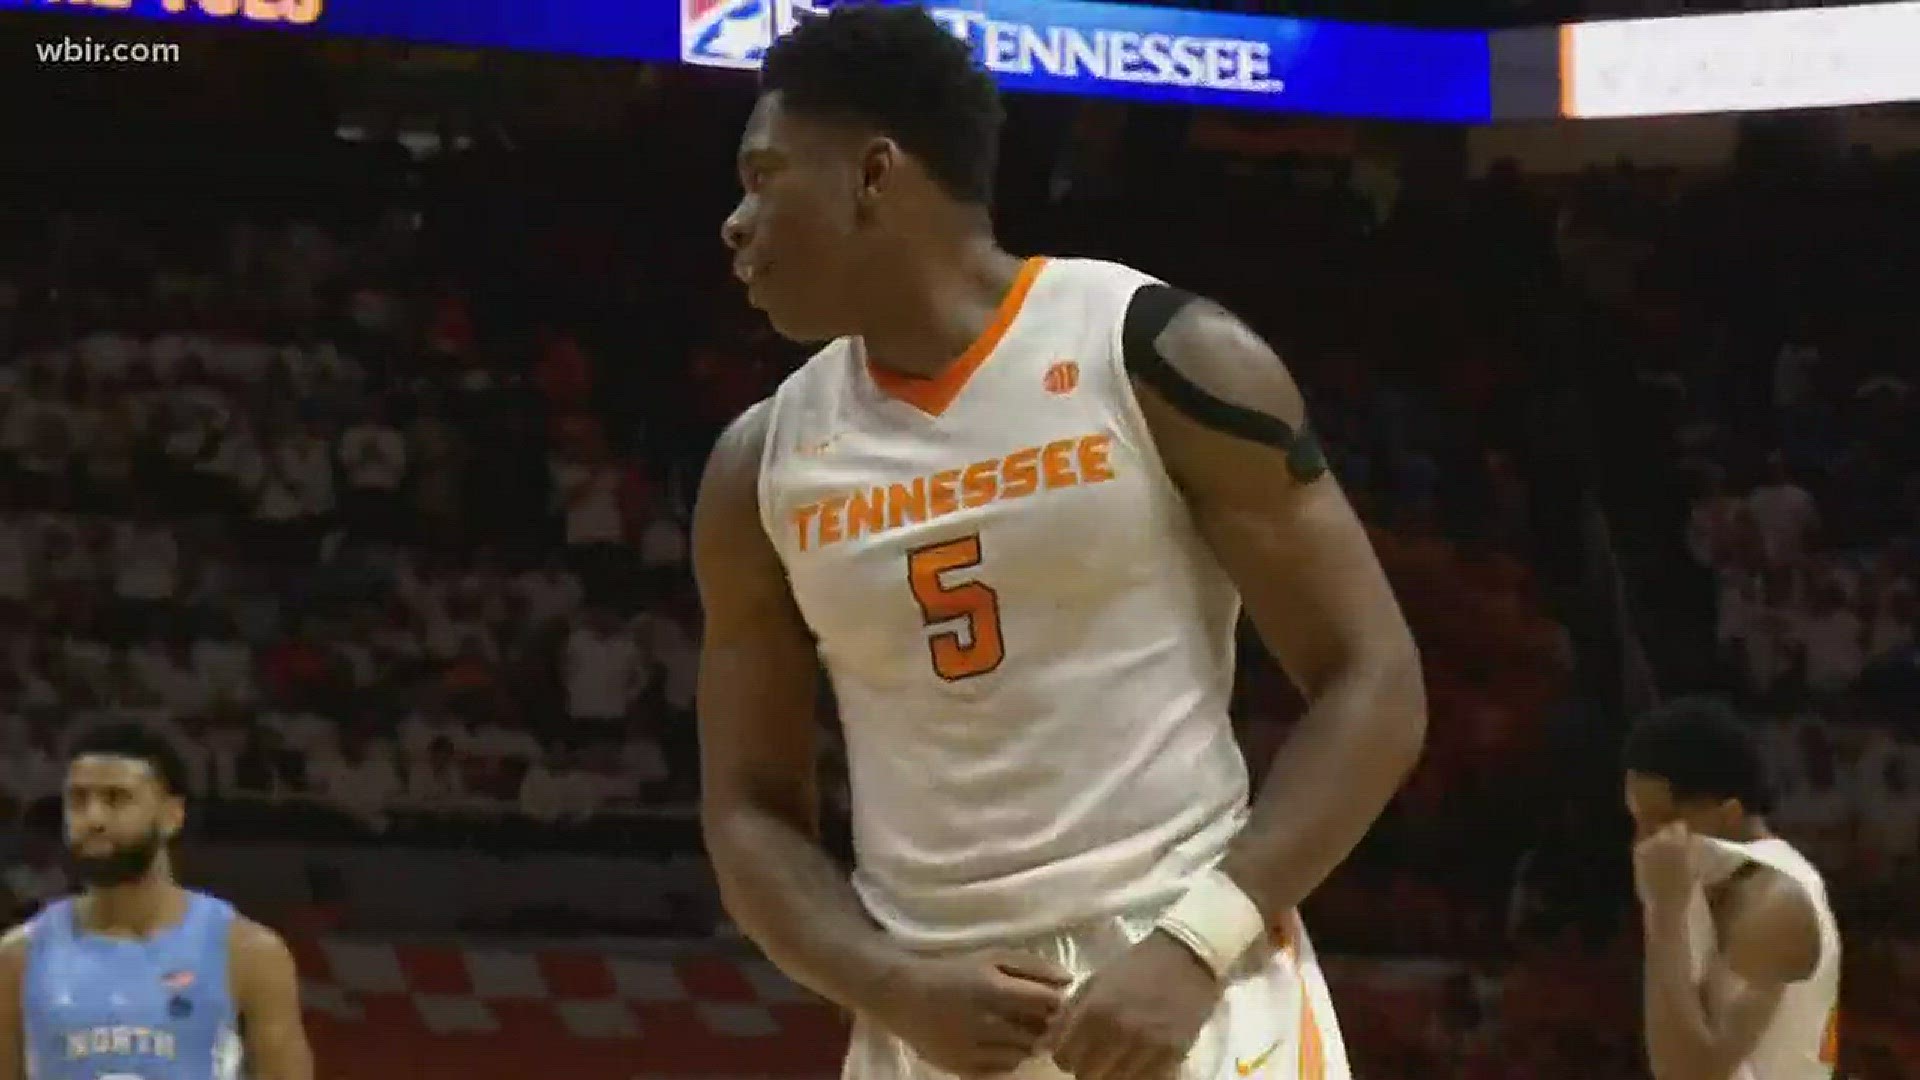 Tennessee plays Wright State in the first round of the NCAA Tournament and Admiral Schofield knows one of the players on the Raiders roster.